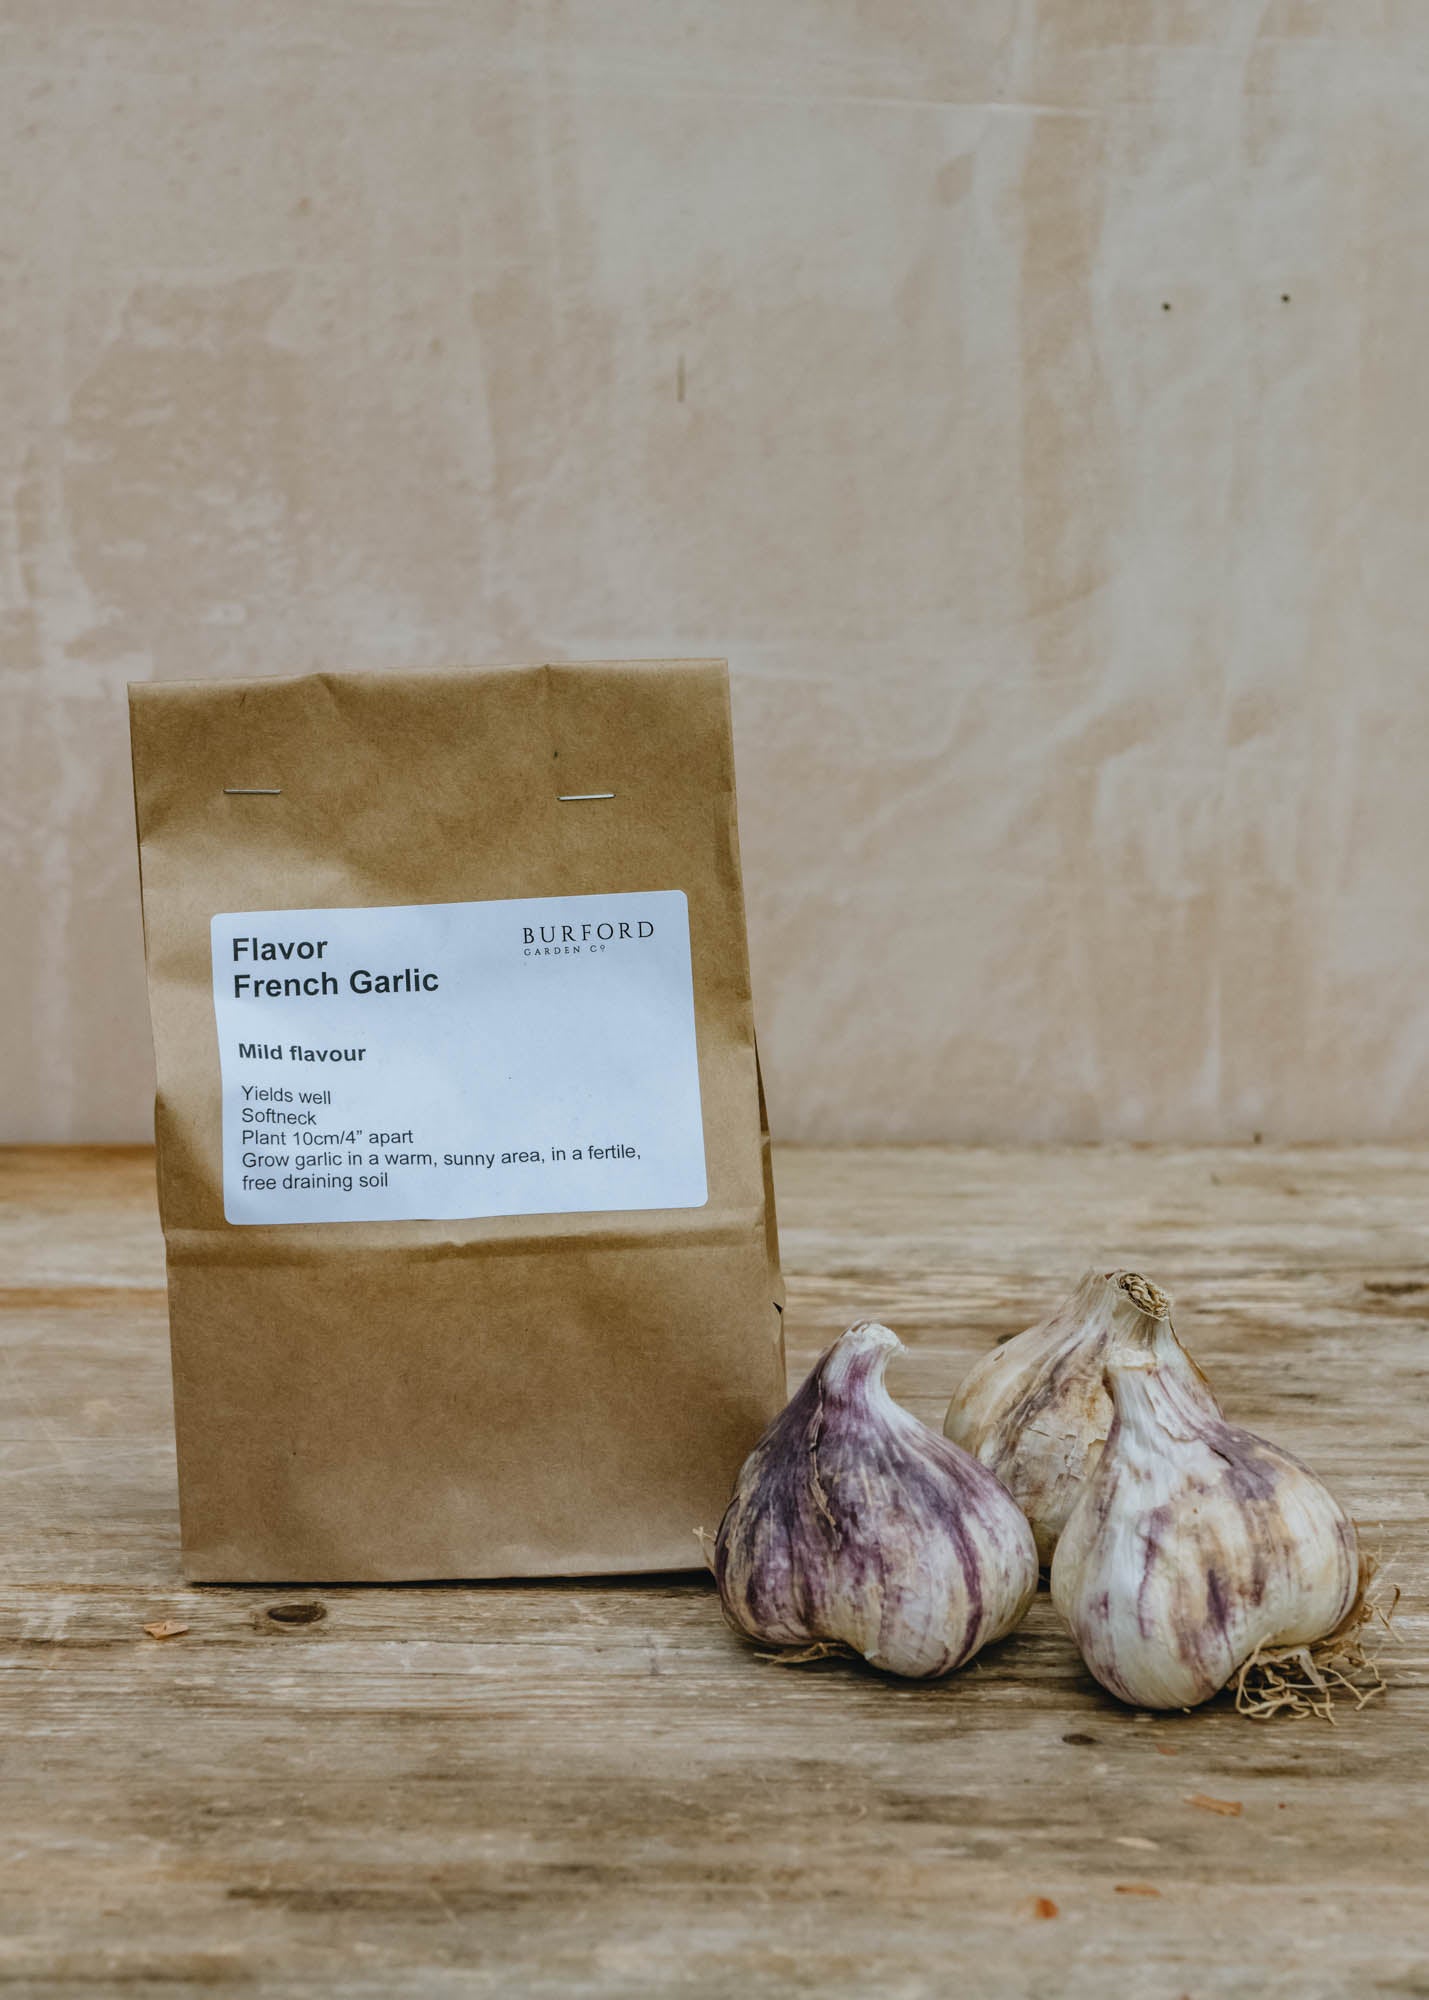 French Garlic 'Flavor', pack of 50 sets